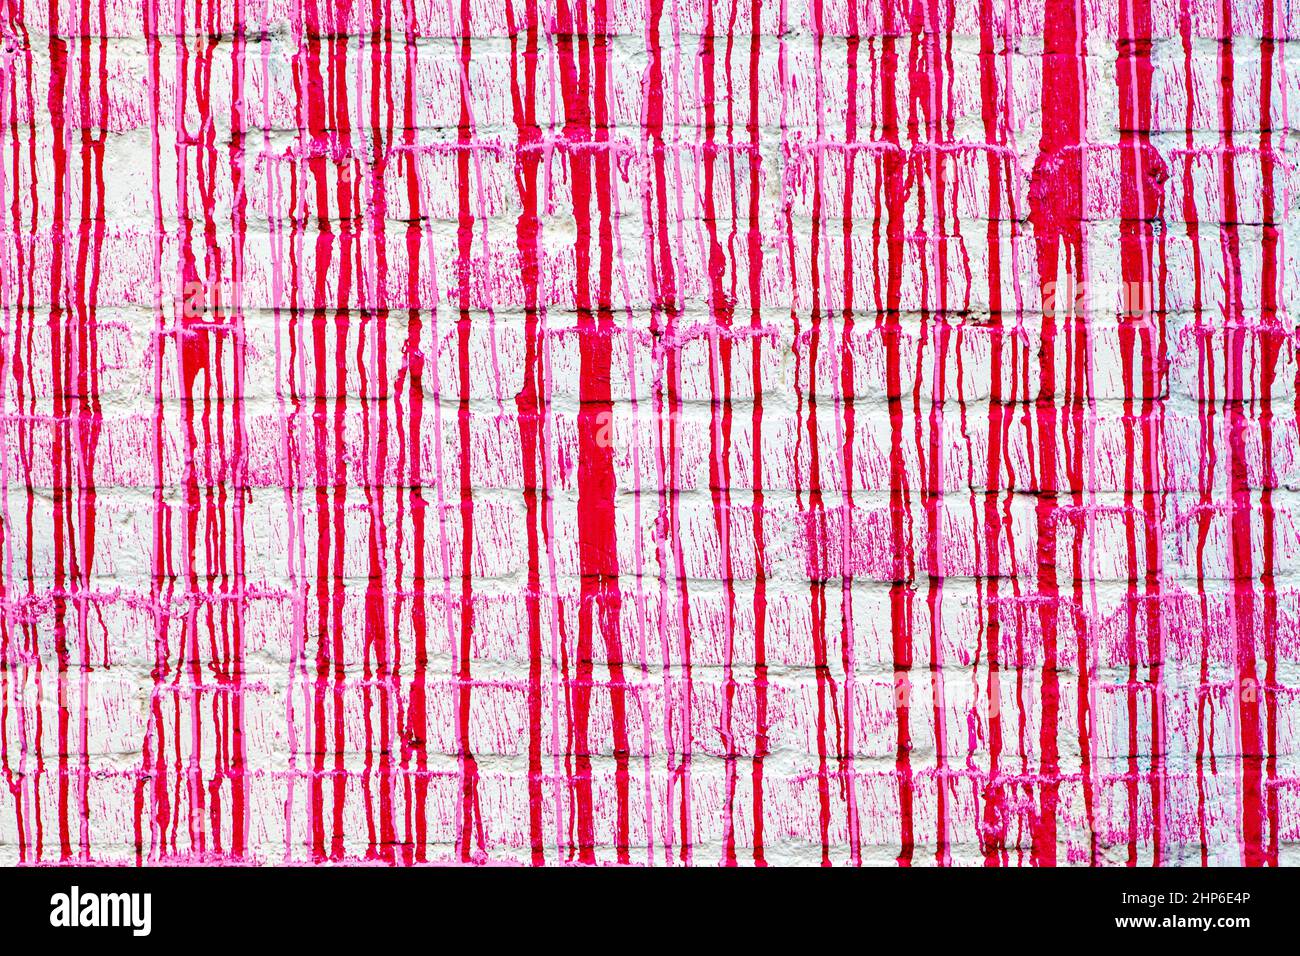 Red paint drips on a white brick wall abstract grunge color texture background Stock Photo